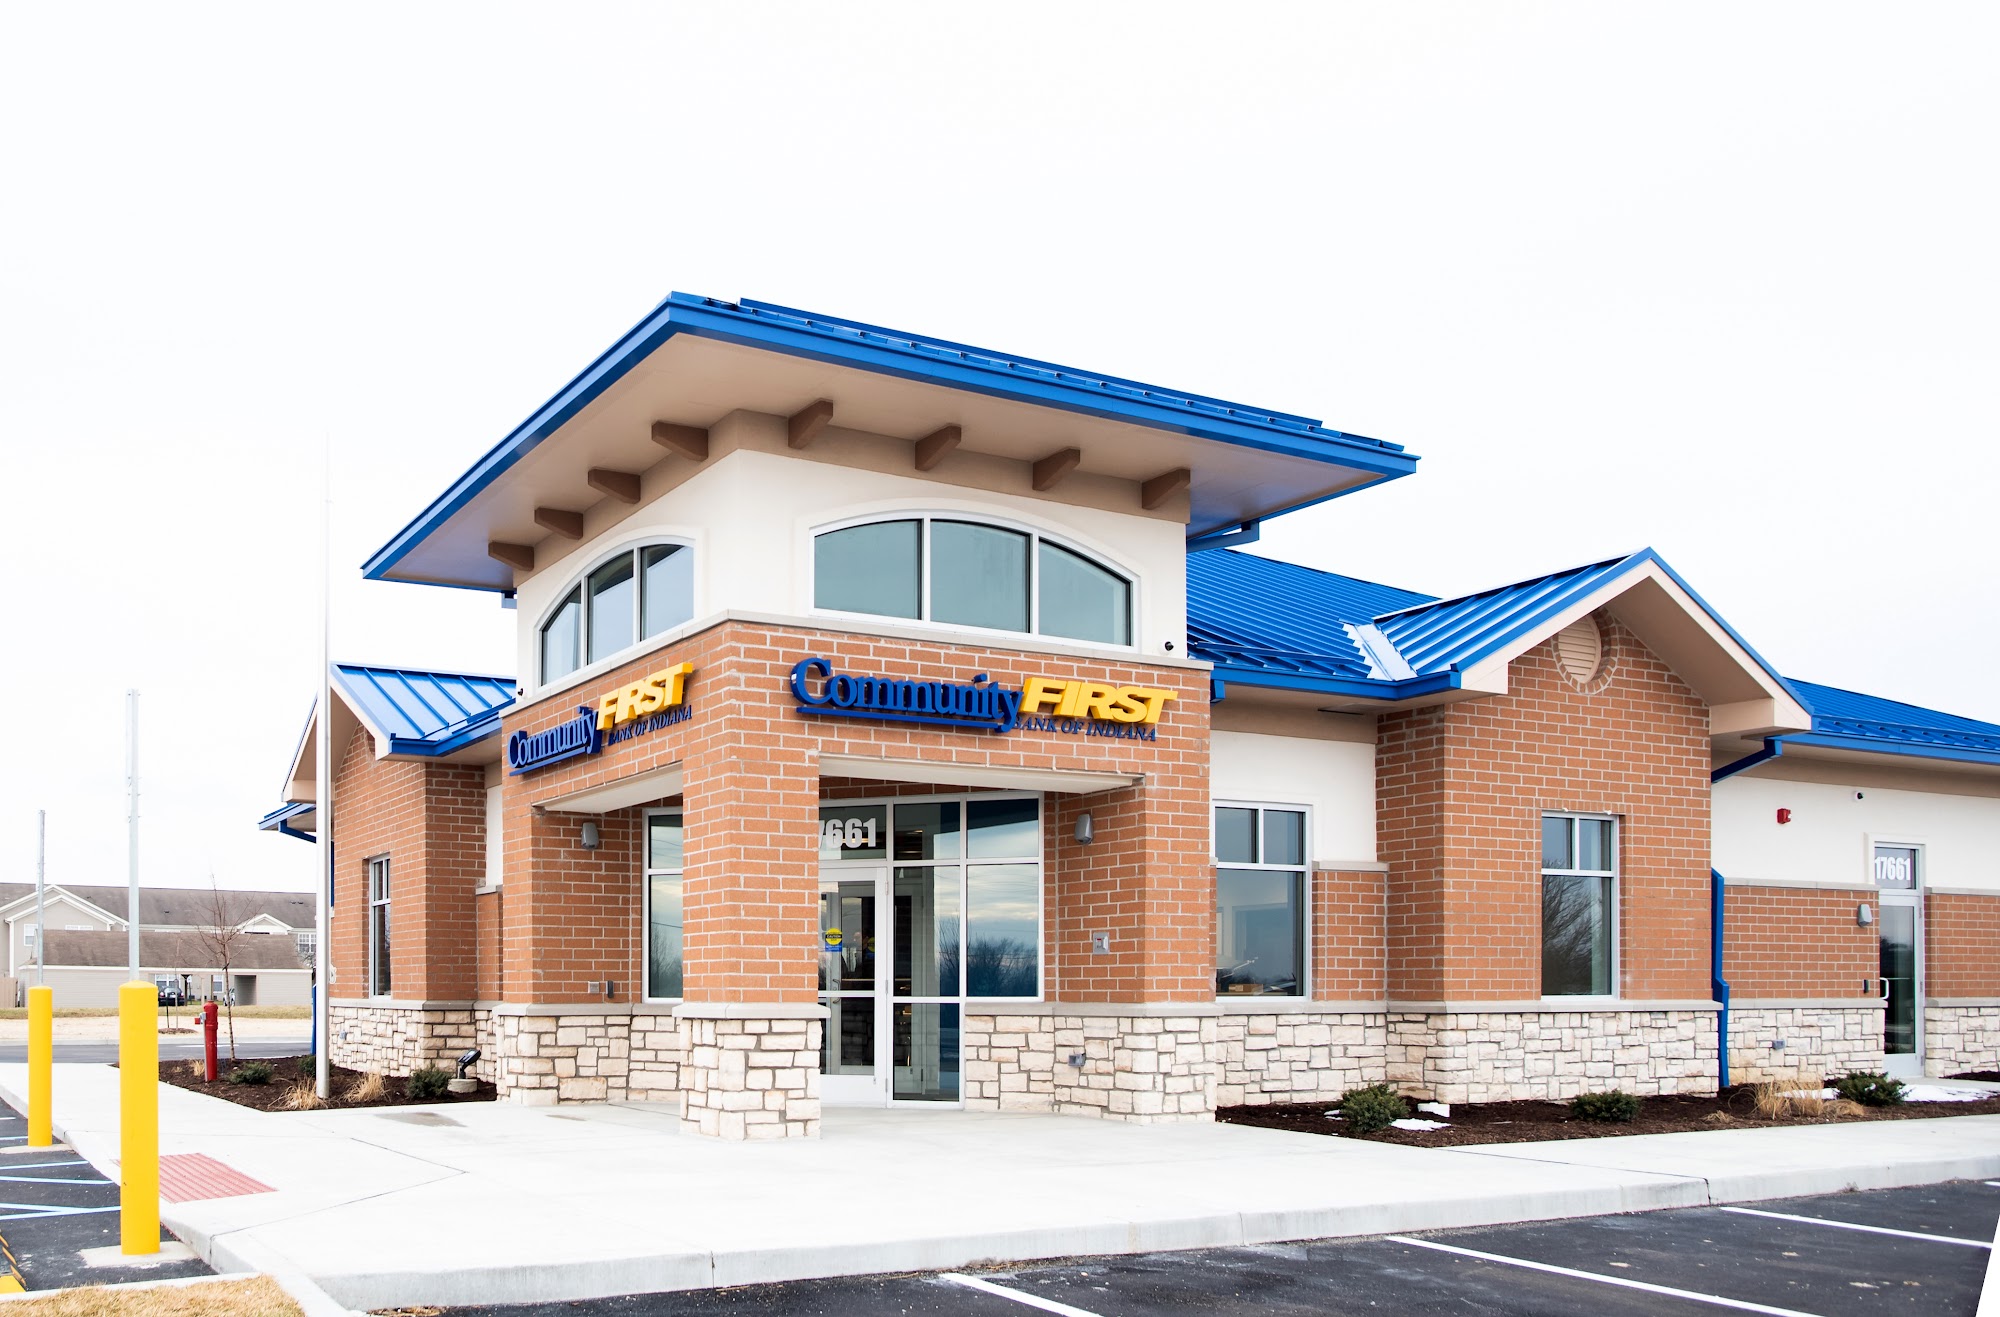 Community First Bank of Indiana